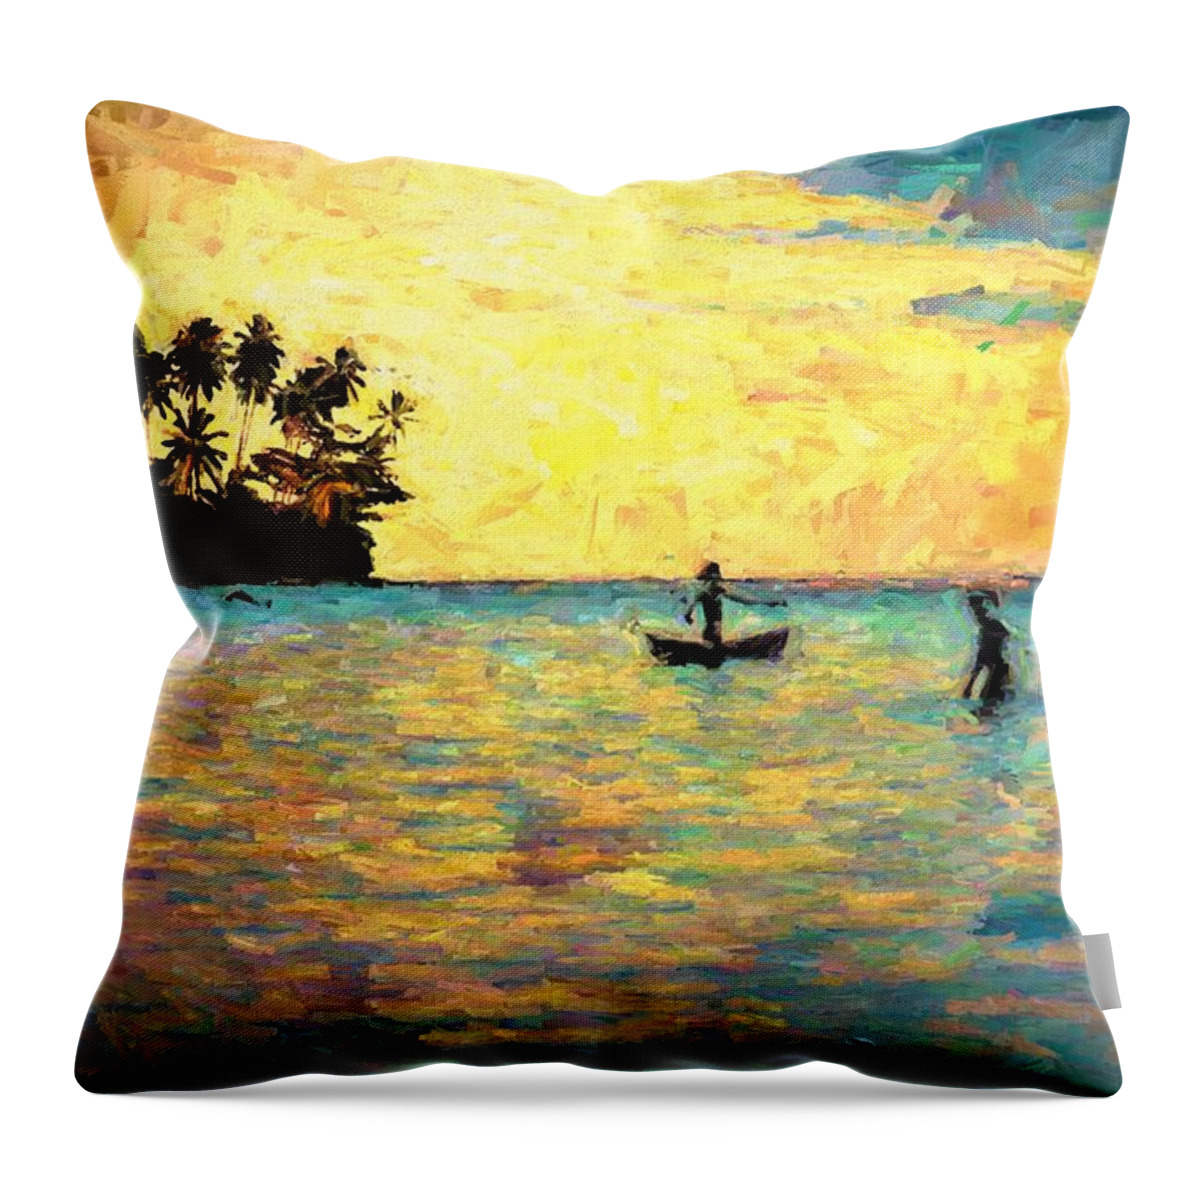 View Throw Pillow featuring the mixed media Liapari Island Fishing In The Lagoon by Joan Stratton